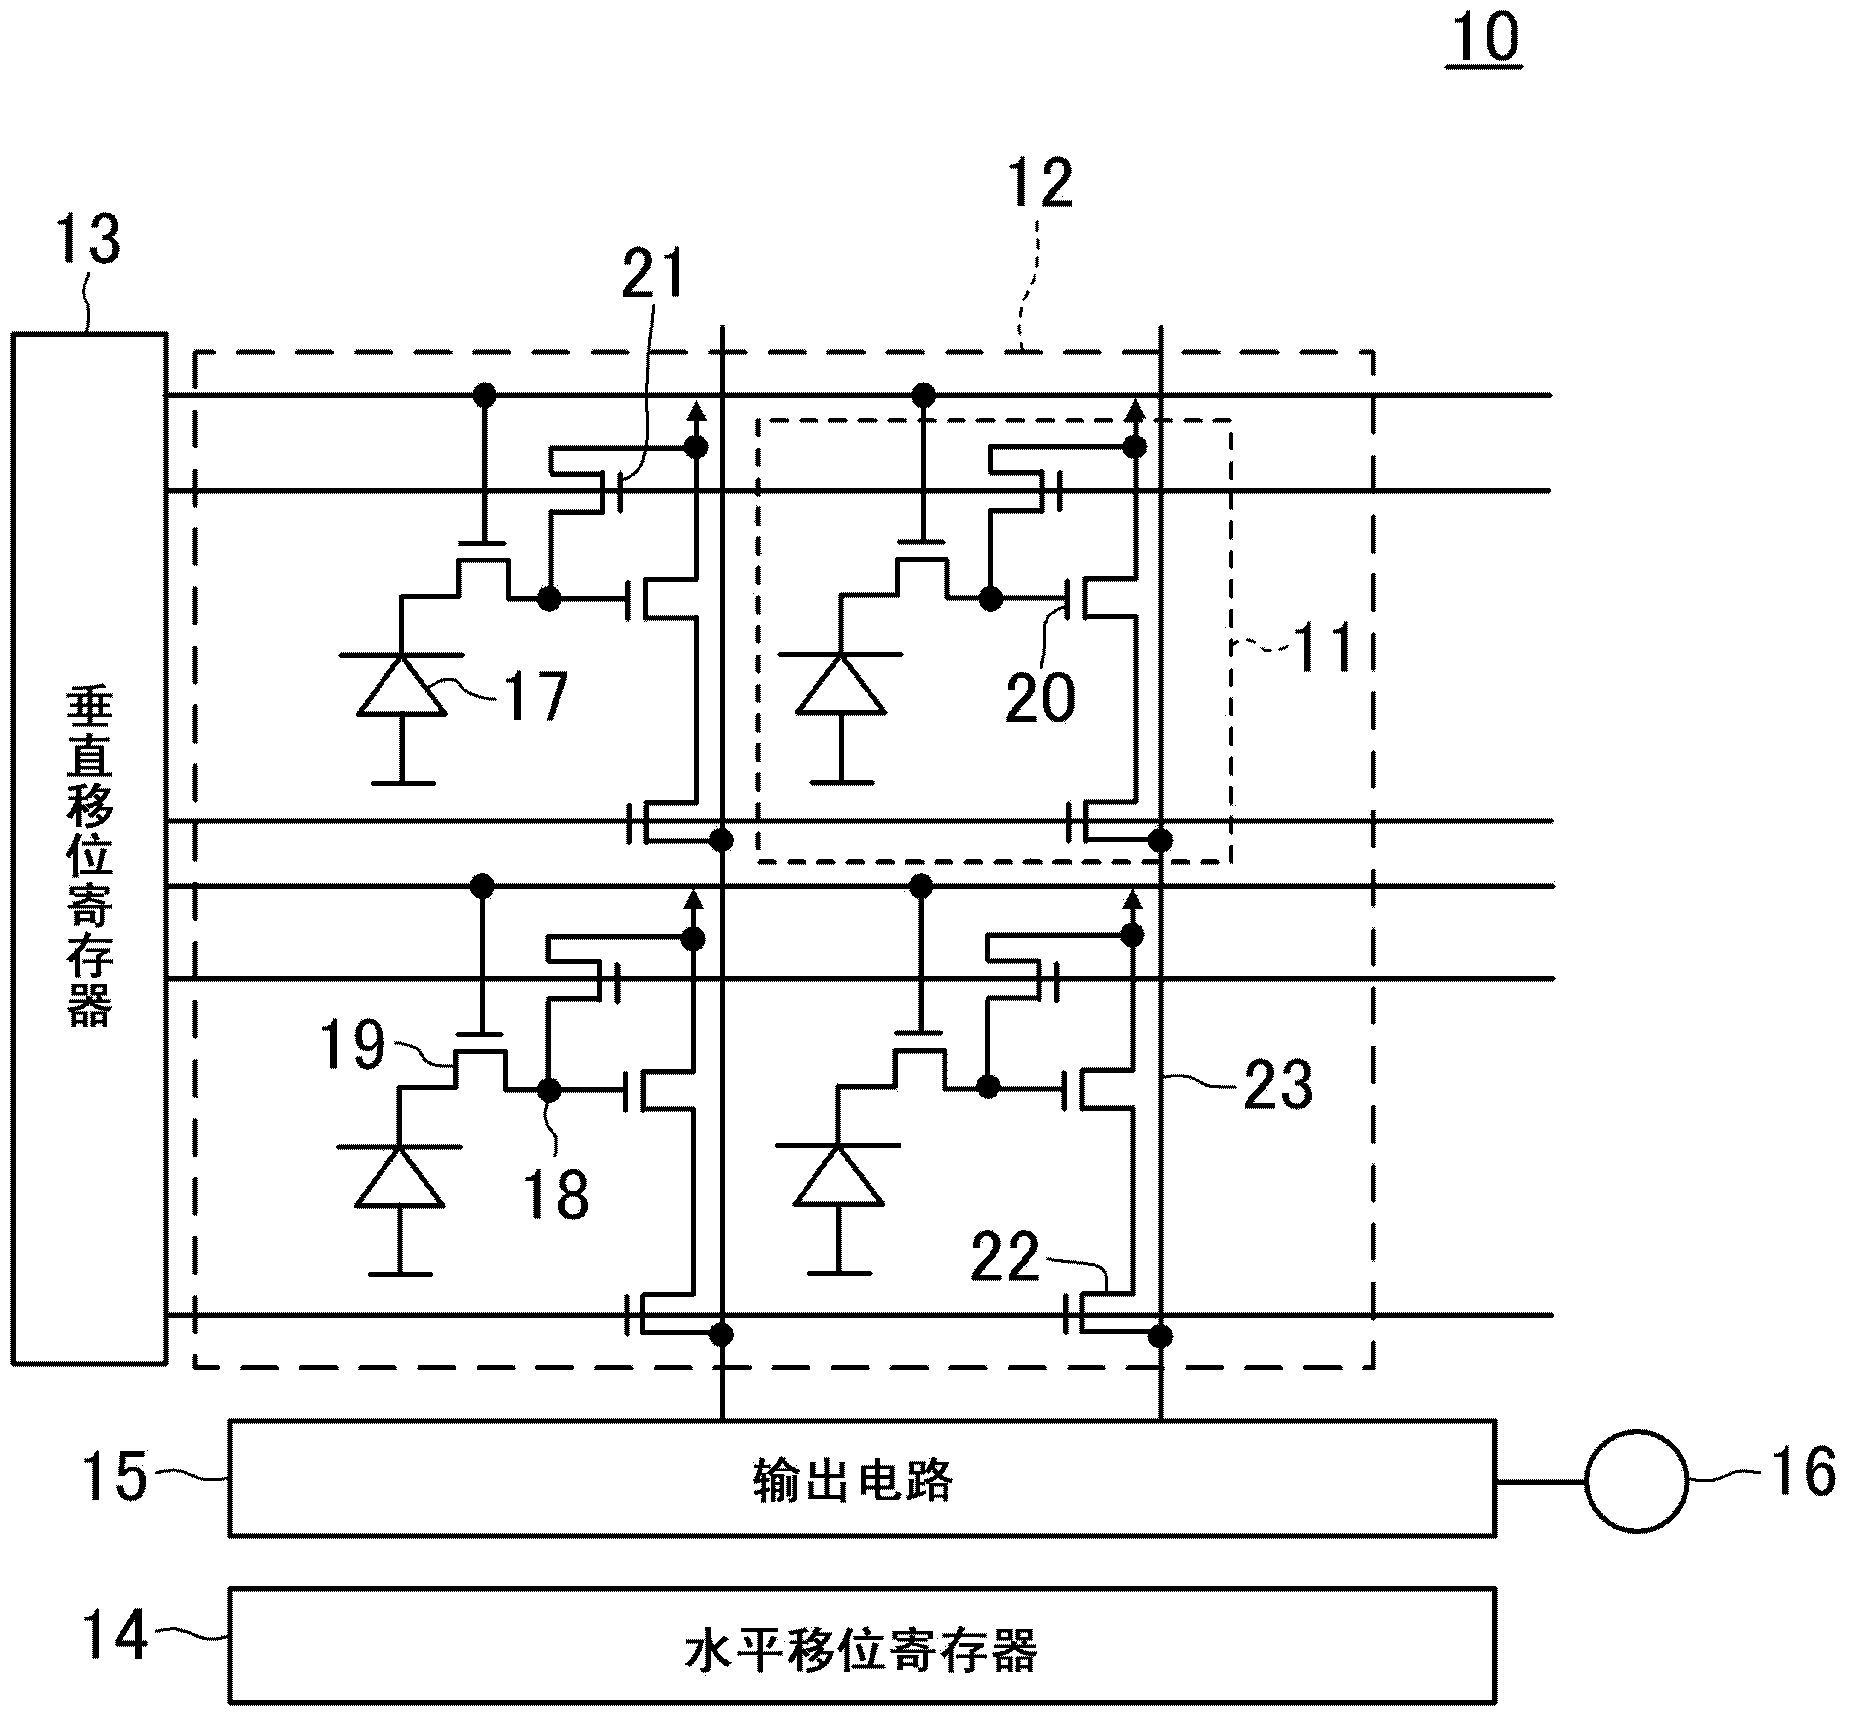 Solid-state imaging device and manufacturing method therefor